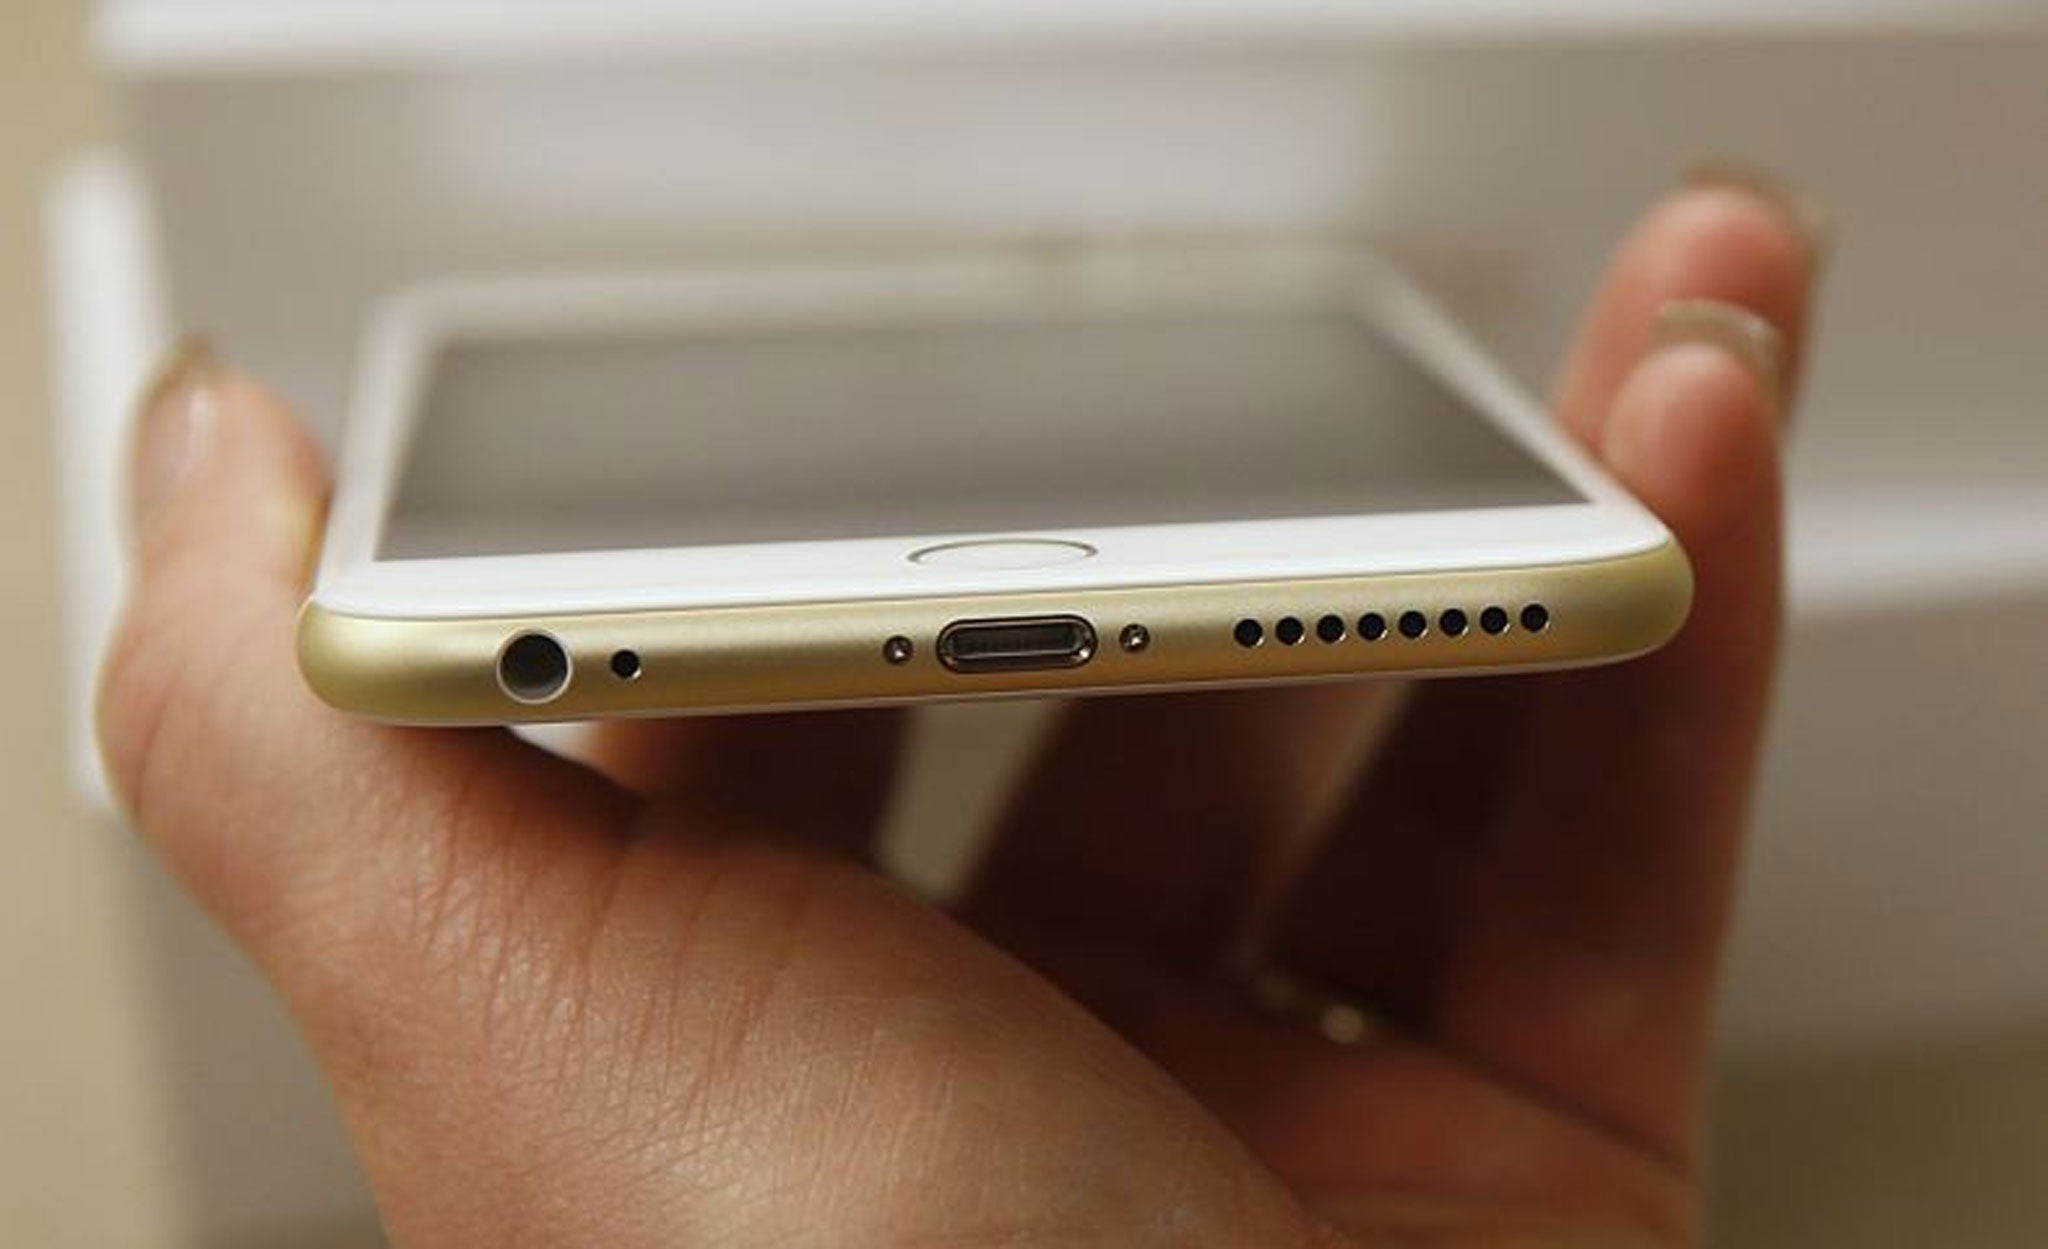 iPhone 6 users are complaining that the phones are trapping their hair and pulling it out